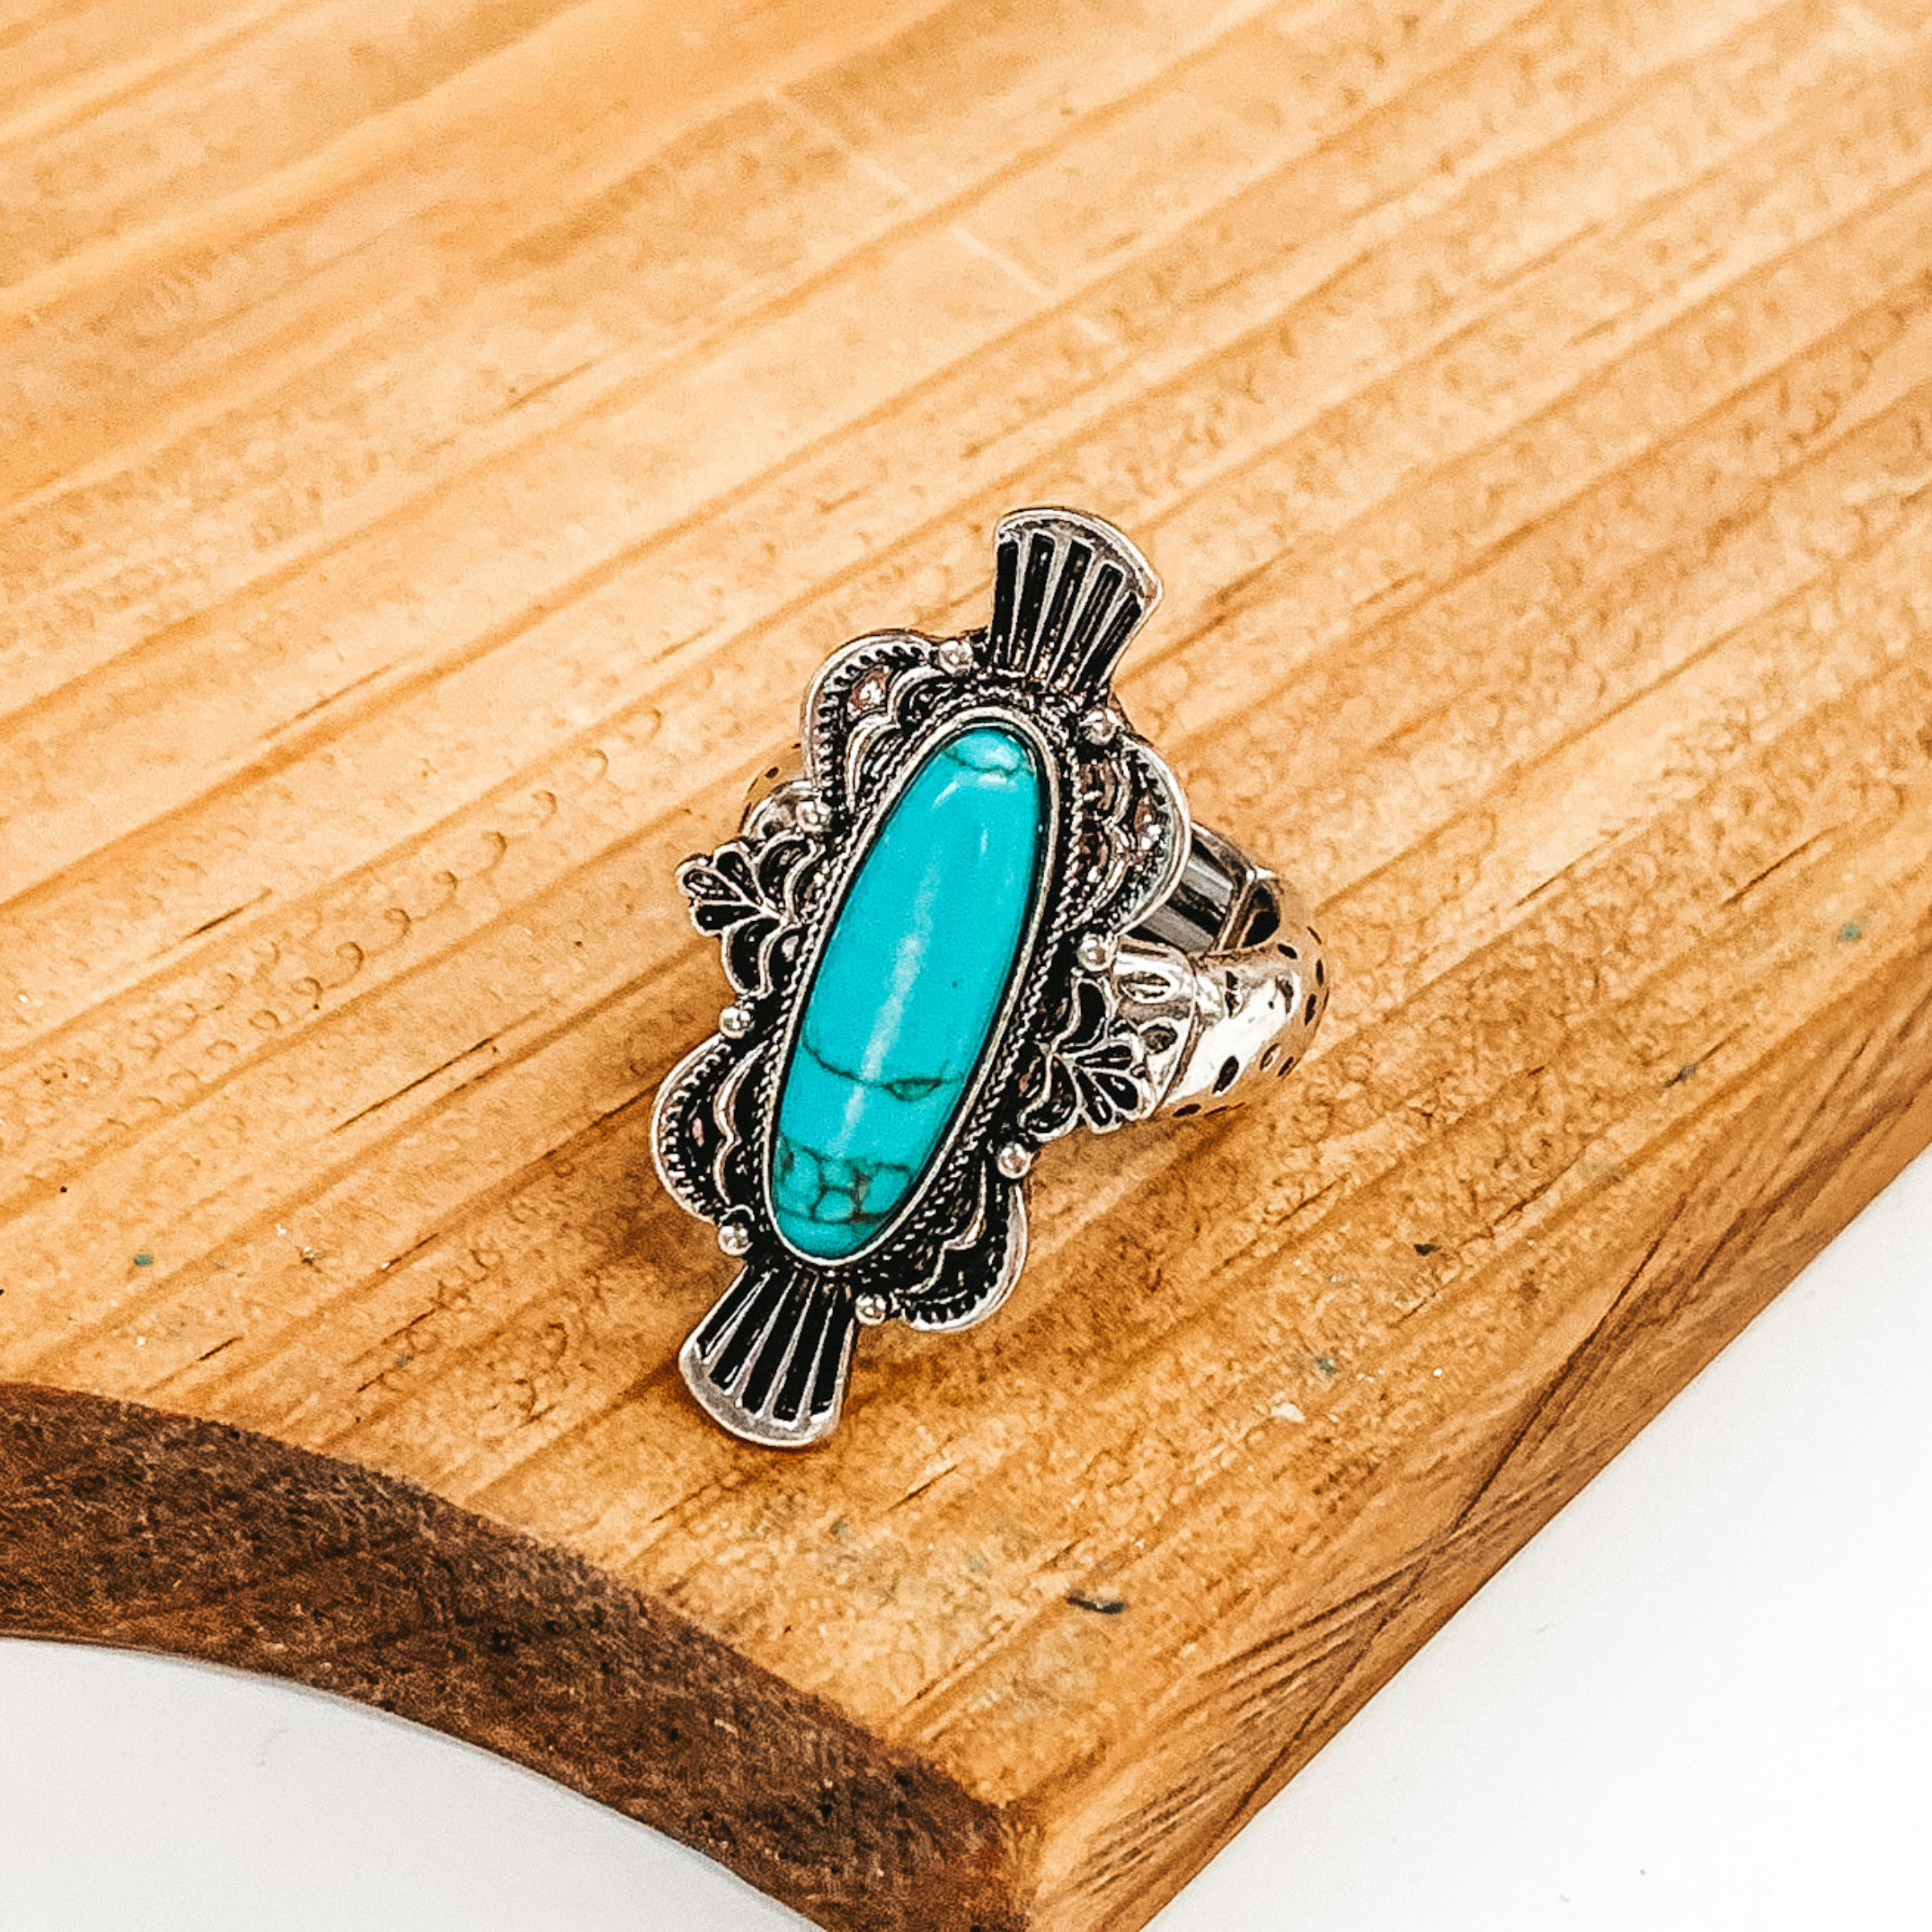 This ring is a silver stretchy ring with a thin band that has an intricate oval pendant with a center turquoise, oval stone. This ring is pictured laying on a brown block on a white background.